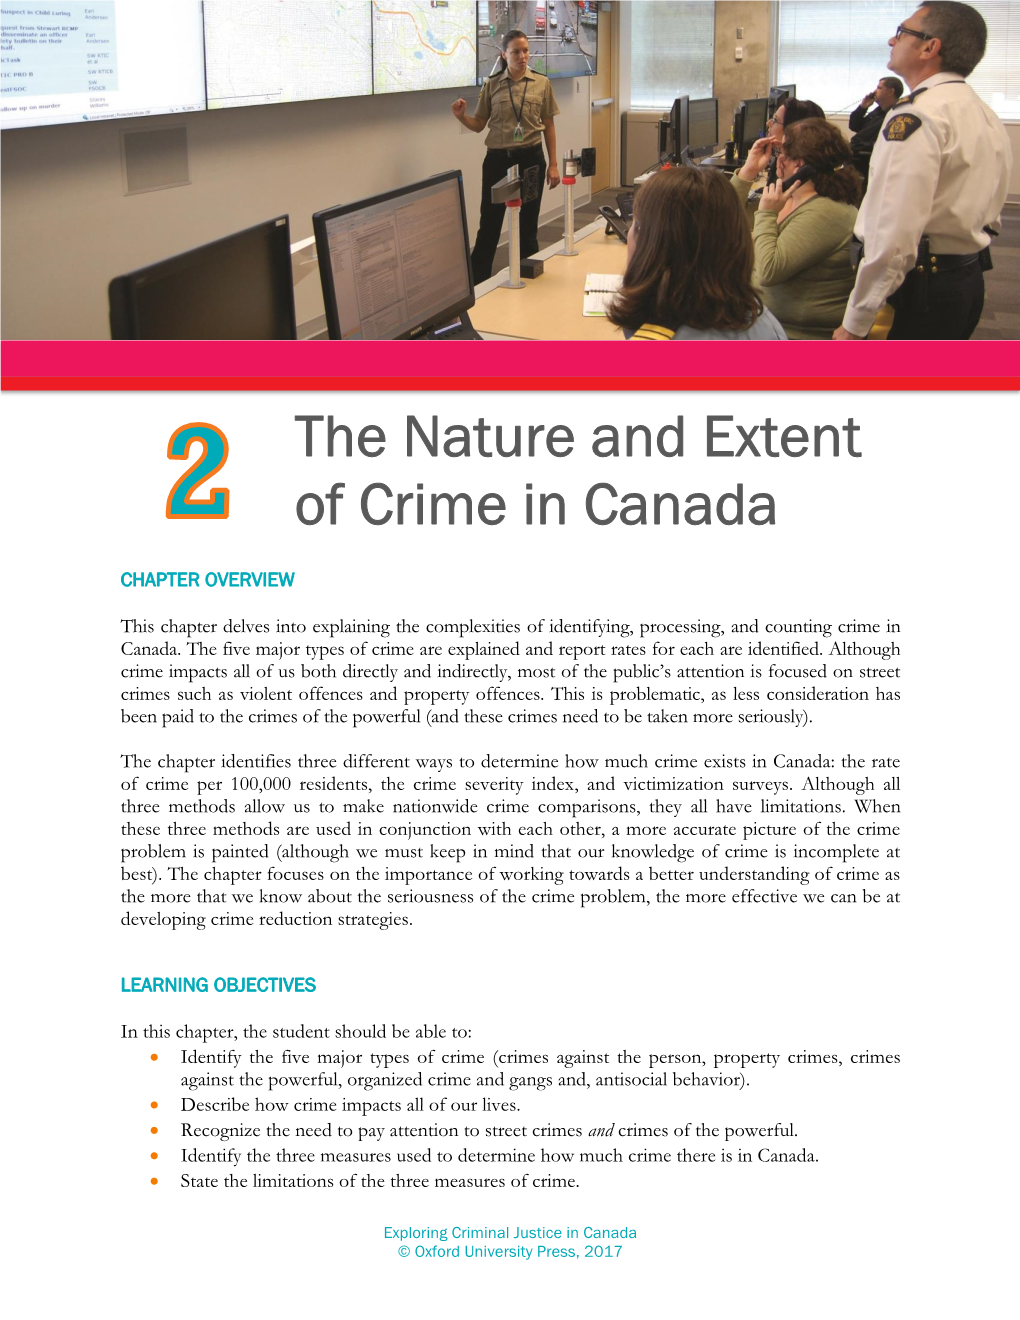 The Nature and Extent of Crime in Canada